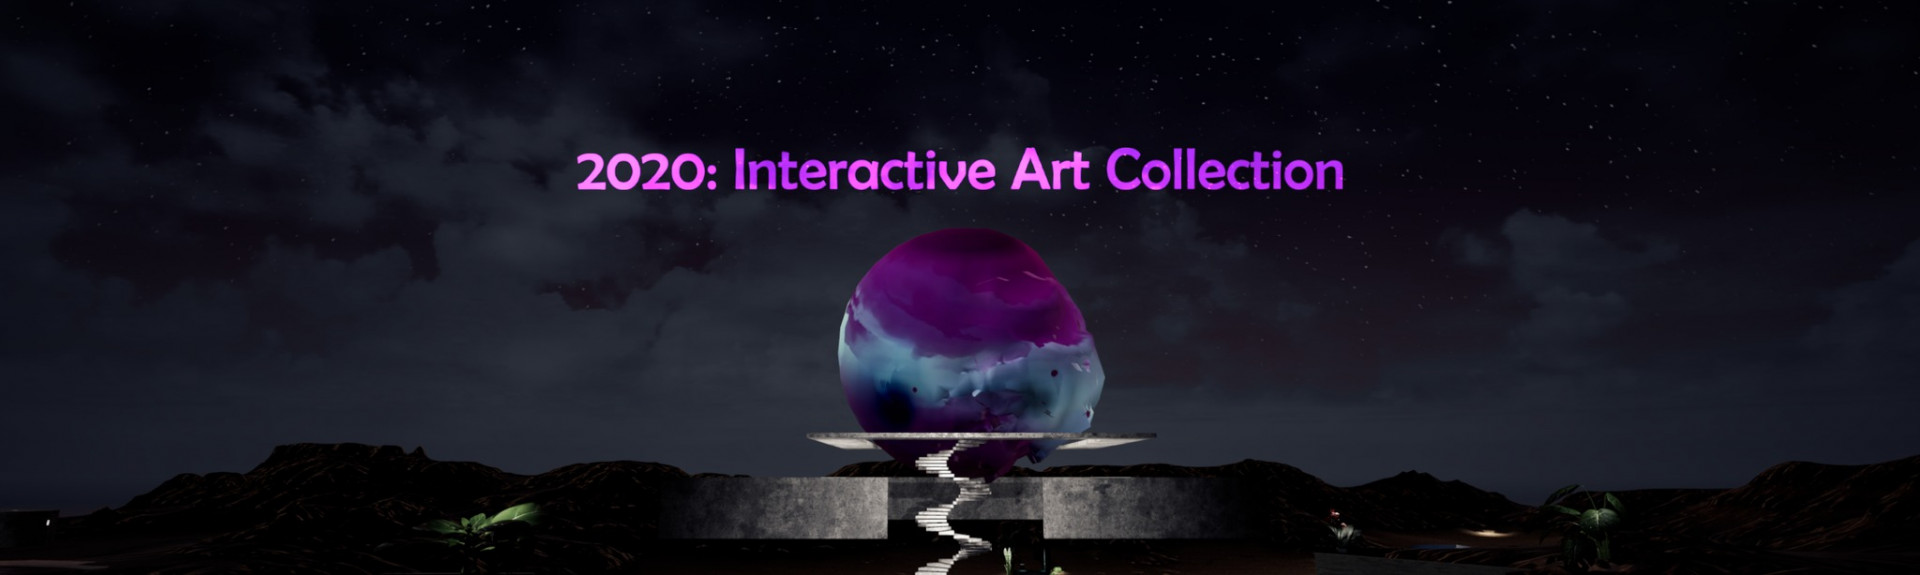 2020: Interactive Art Collection